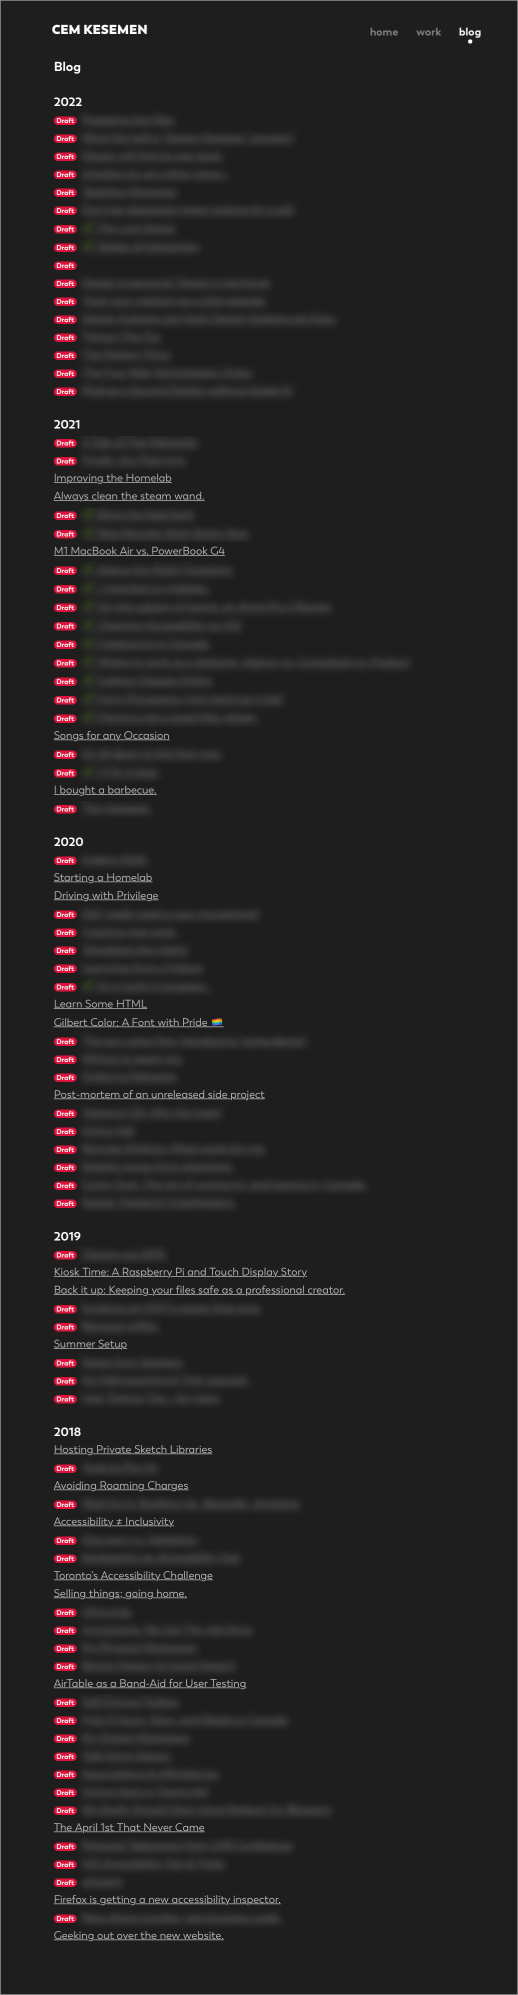 My blog posts list, showing blurred drafts, which are about 5 times more than my published posts.